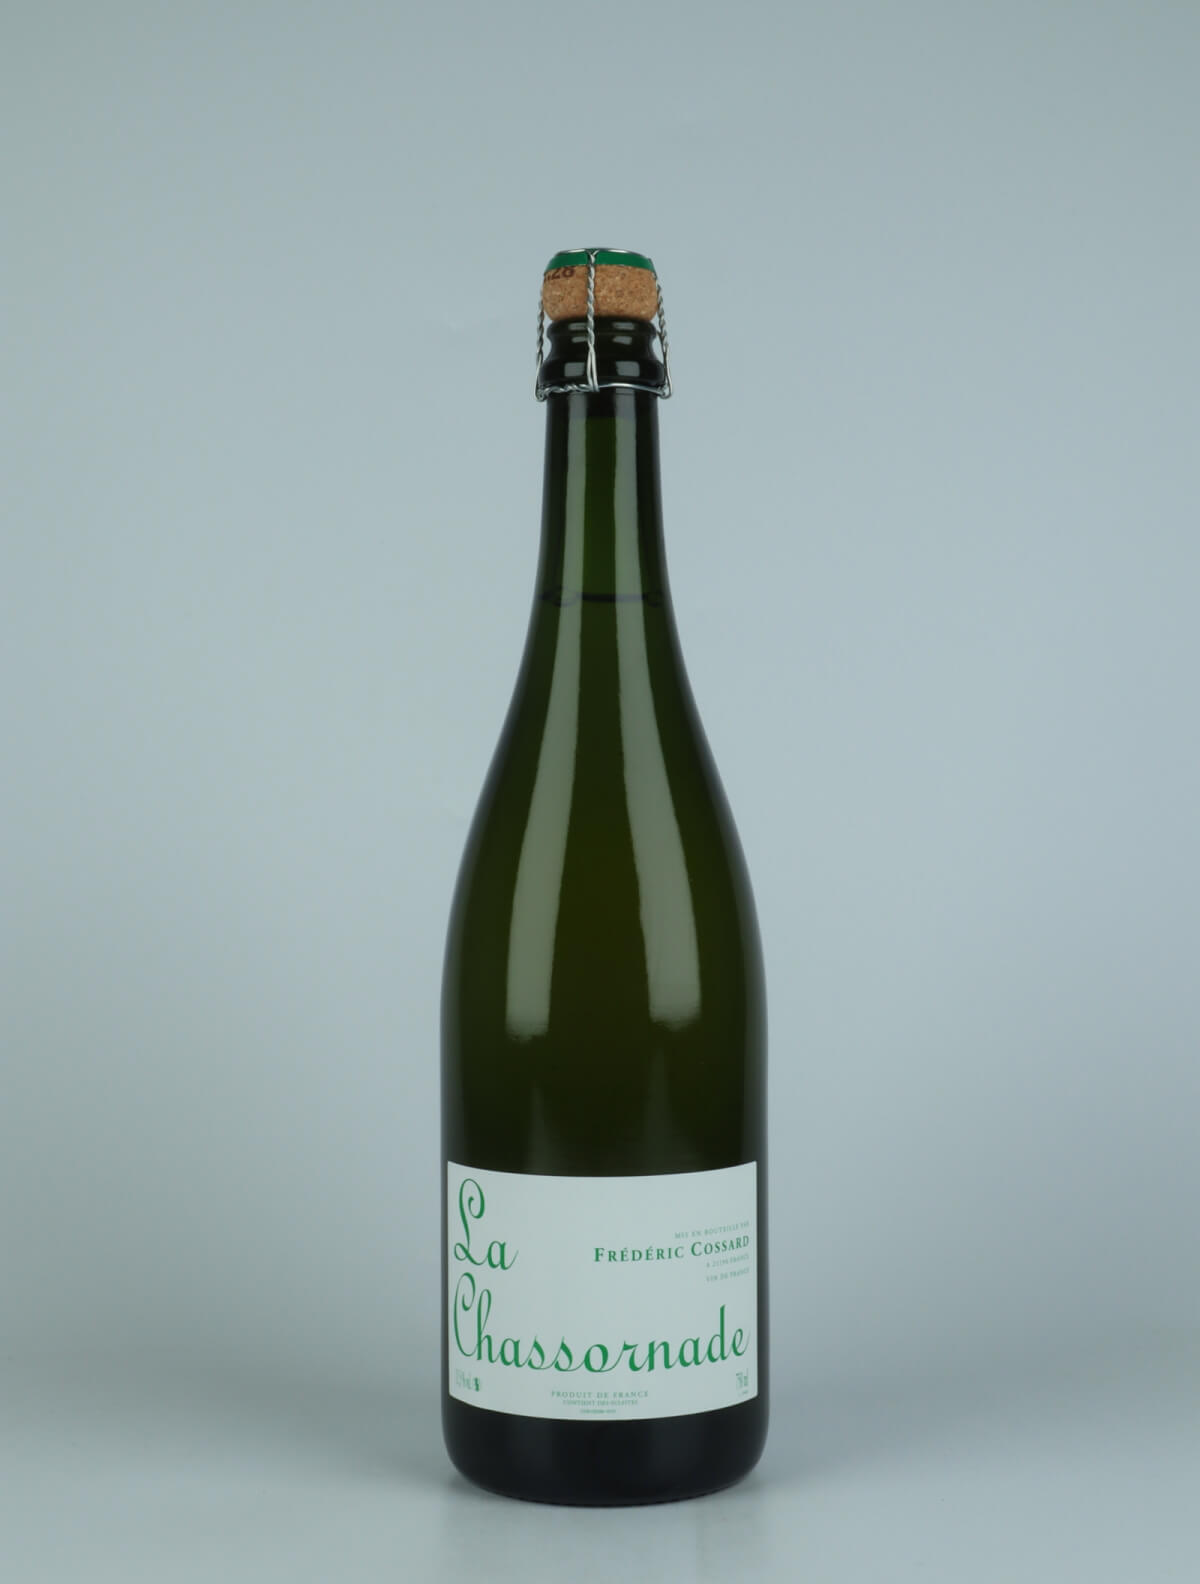 A bottle 2021 Chassornade Sparkling from Frédéric Cossard, Burgundy in France